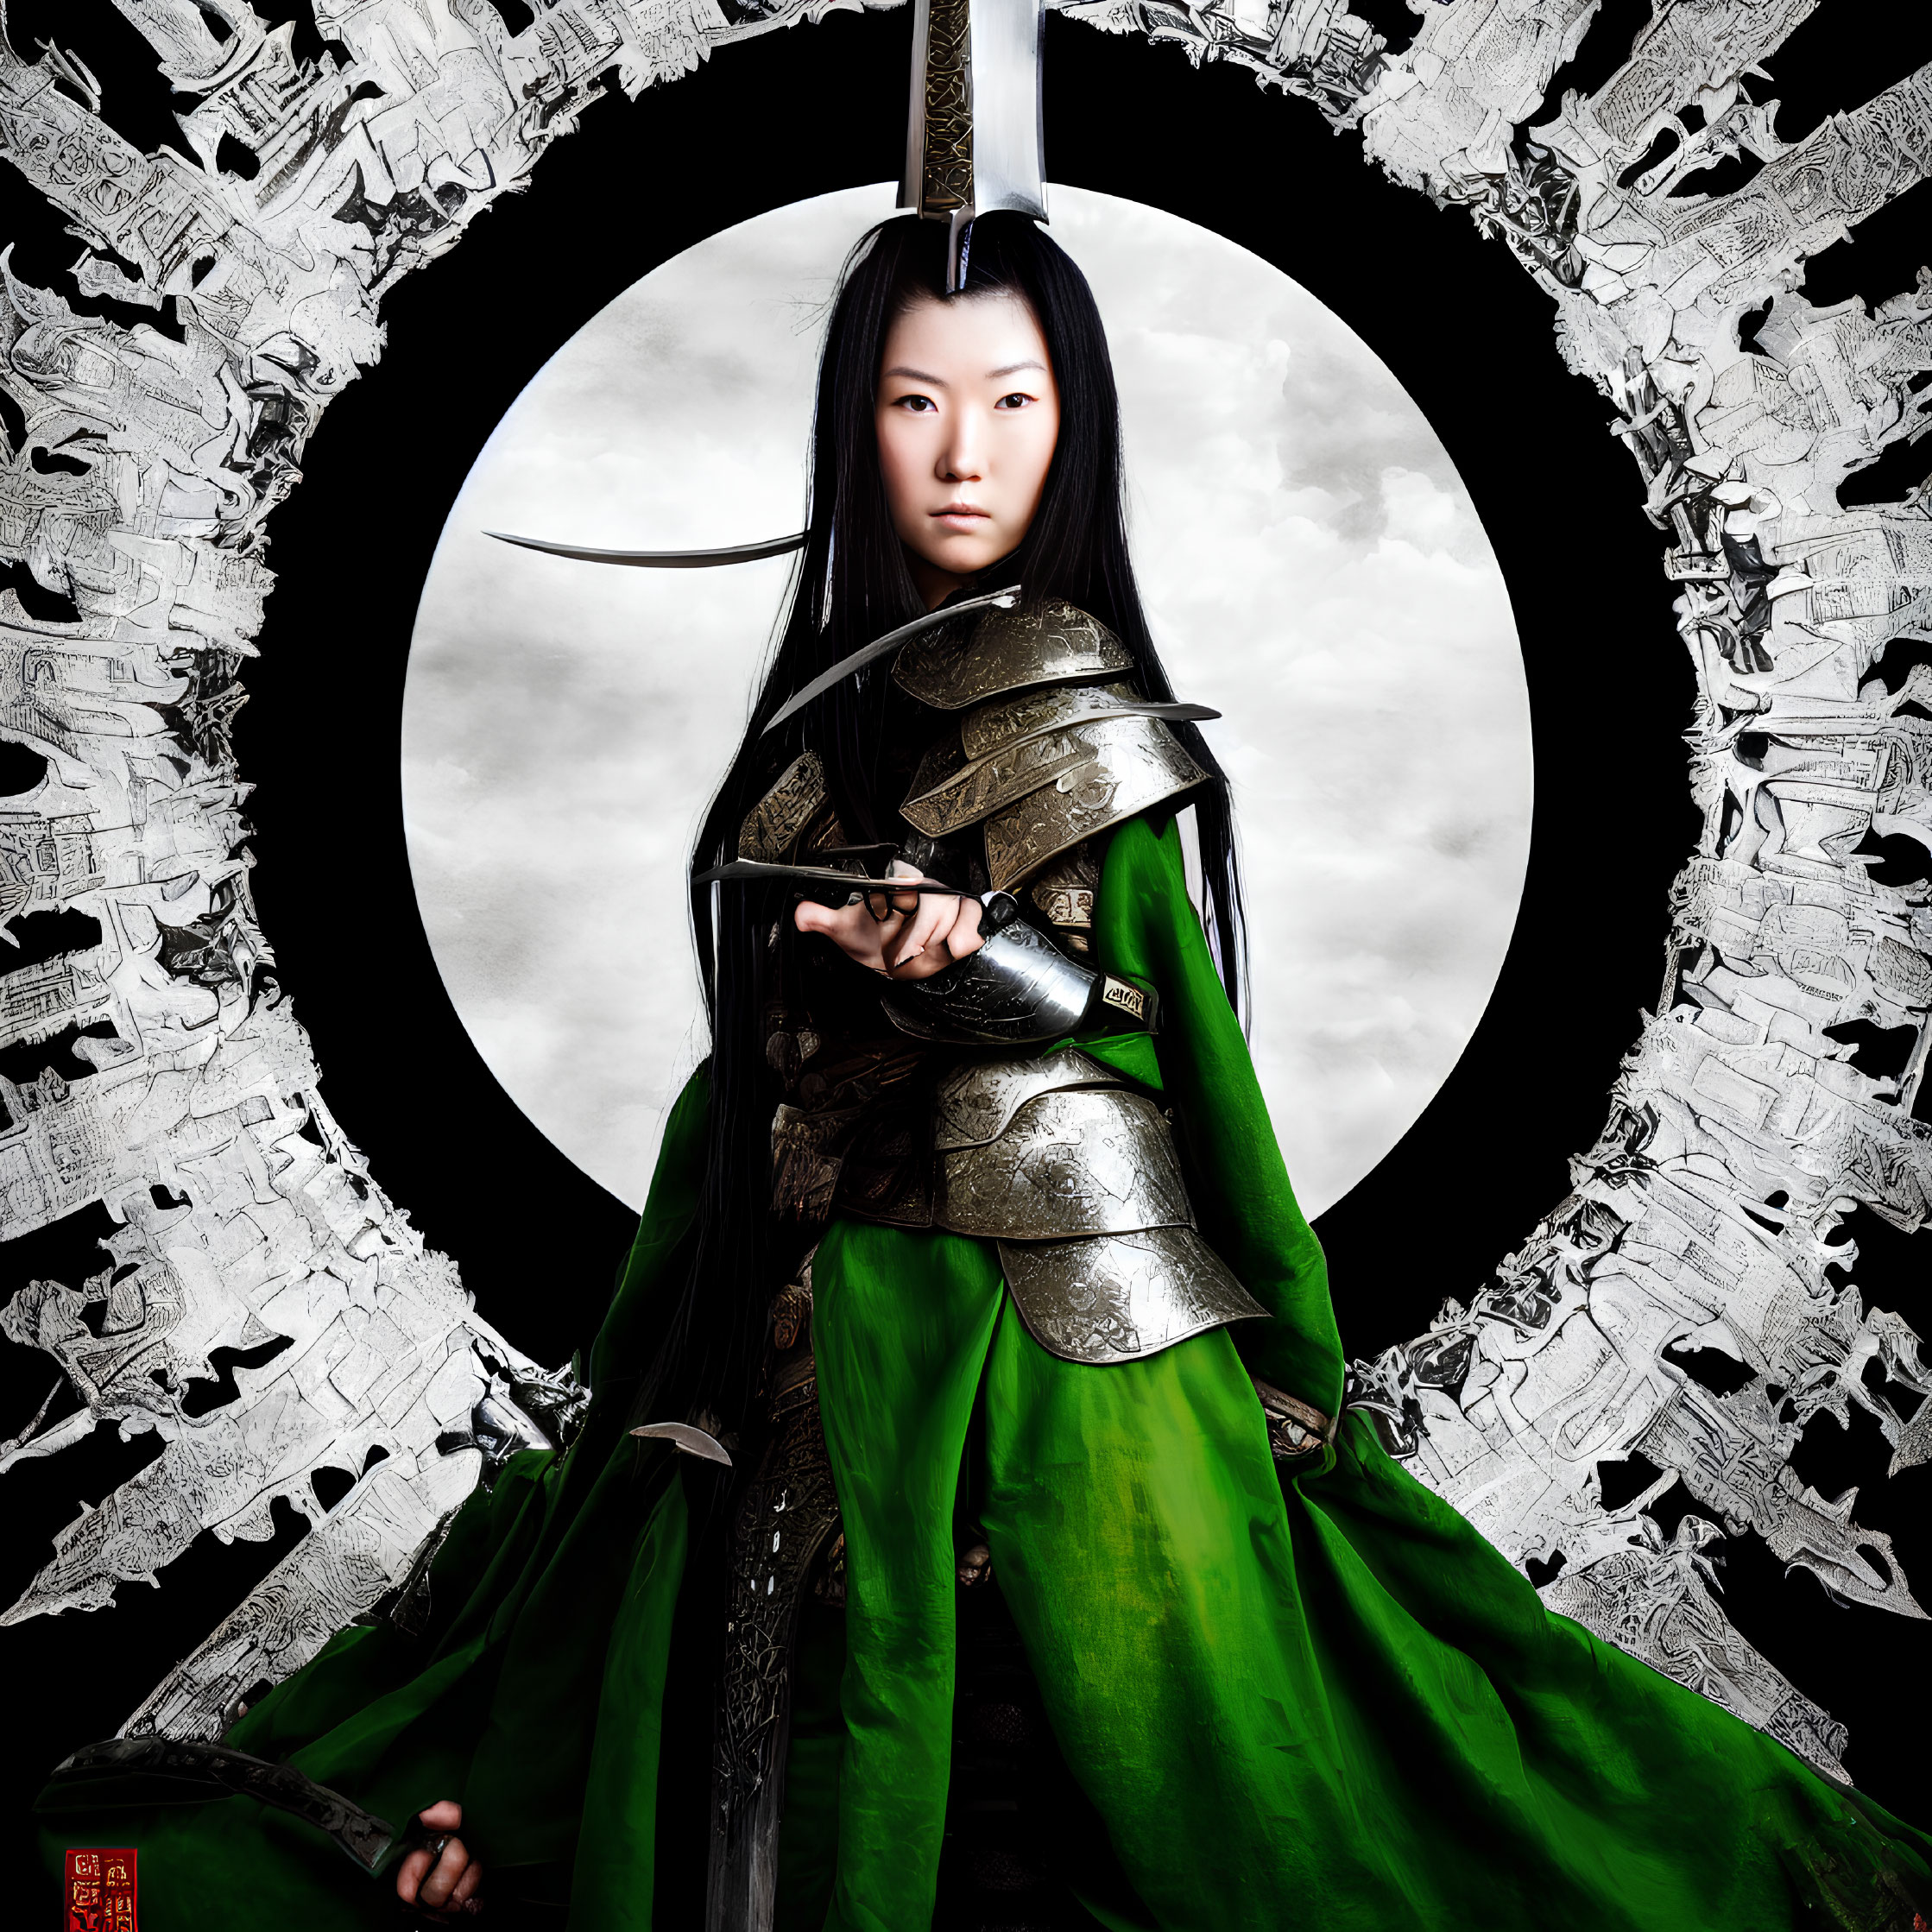 Traditional attired woman with sword in green armor against shattered circular background